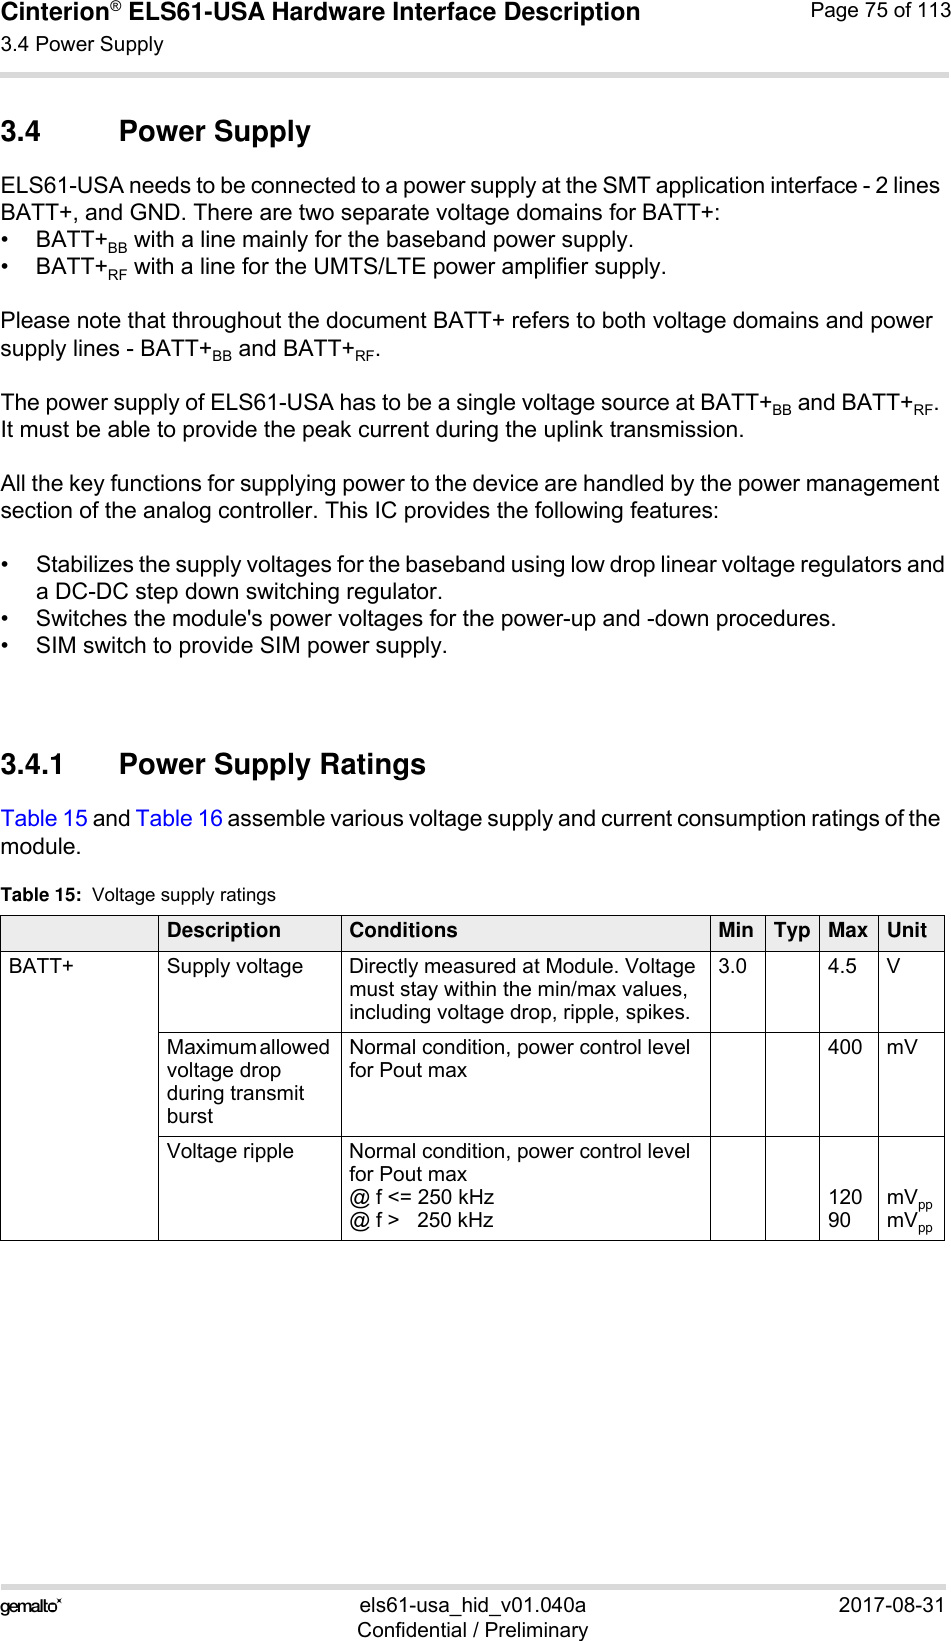 Cinterion® ELS61-USA Hardware Interface Description3.4 Power Supply83els61-usa_hid_v01.040a 2017-08-31Confidential / PreliminaryPage 75 of 1133.4 Power SupplyELS61-USA needs to be connected to a power supply at the SMT application interface - 2 lines BATT+, and GND. There are two separate voltage domains for BATT+:•BATT+BB with a line mainly for the baseband power supply.•BATT+RF with a line for the UMTS/LTE power amplifier supply.Please note that throughout the document BATT+ refers to both voltage domains and power supply lines - BATT+BB and BATT+RF.The power supply of ELS61-USA has to be a single voltage source at BATT+BB and BATT+RF. It must be able to provide the peak current during the uplink transmission. All the key functions for supplying power to the device are handled by the power management section of the analog controller. This IC provides the following features:• Stabilizes the supply voltages for the baseband using low drop linear voltage regulators anda DC-DC step down switching regulator.• Switches the module&apos;s power voltages for the power-up and -down procedures.• SIM switch to provide SIM power supply.3.4.1 Power Supply RatingsTable 15 and Table 16 assemble various voltage supply and current consumption ratings of the module. Table 15:  Voltage supply ratingsDescription Conditions Min Typ Max UnitBATT+ Supply voltage  Directly measured at Module. Voltage must stay within the min/max values, including voltage drop, ripple, spikes. 3.0 4.5 VMaximum allowed voltage drop during transmit burst Normal condition, power control level for Pout max400 mVVoltage ripple  Normal condition, power control level for Pout max@ f &lt;= 250 kHz@ f &gt;   250 kHz12090mVppmVpp